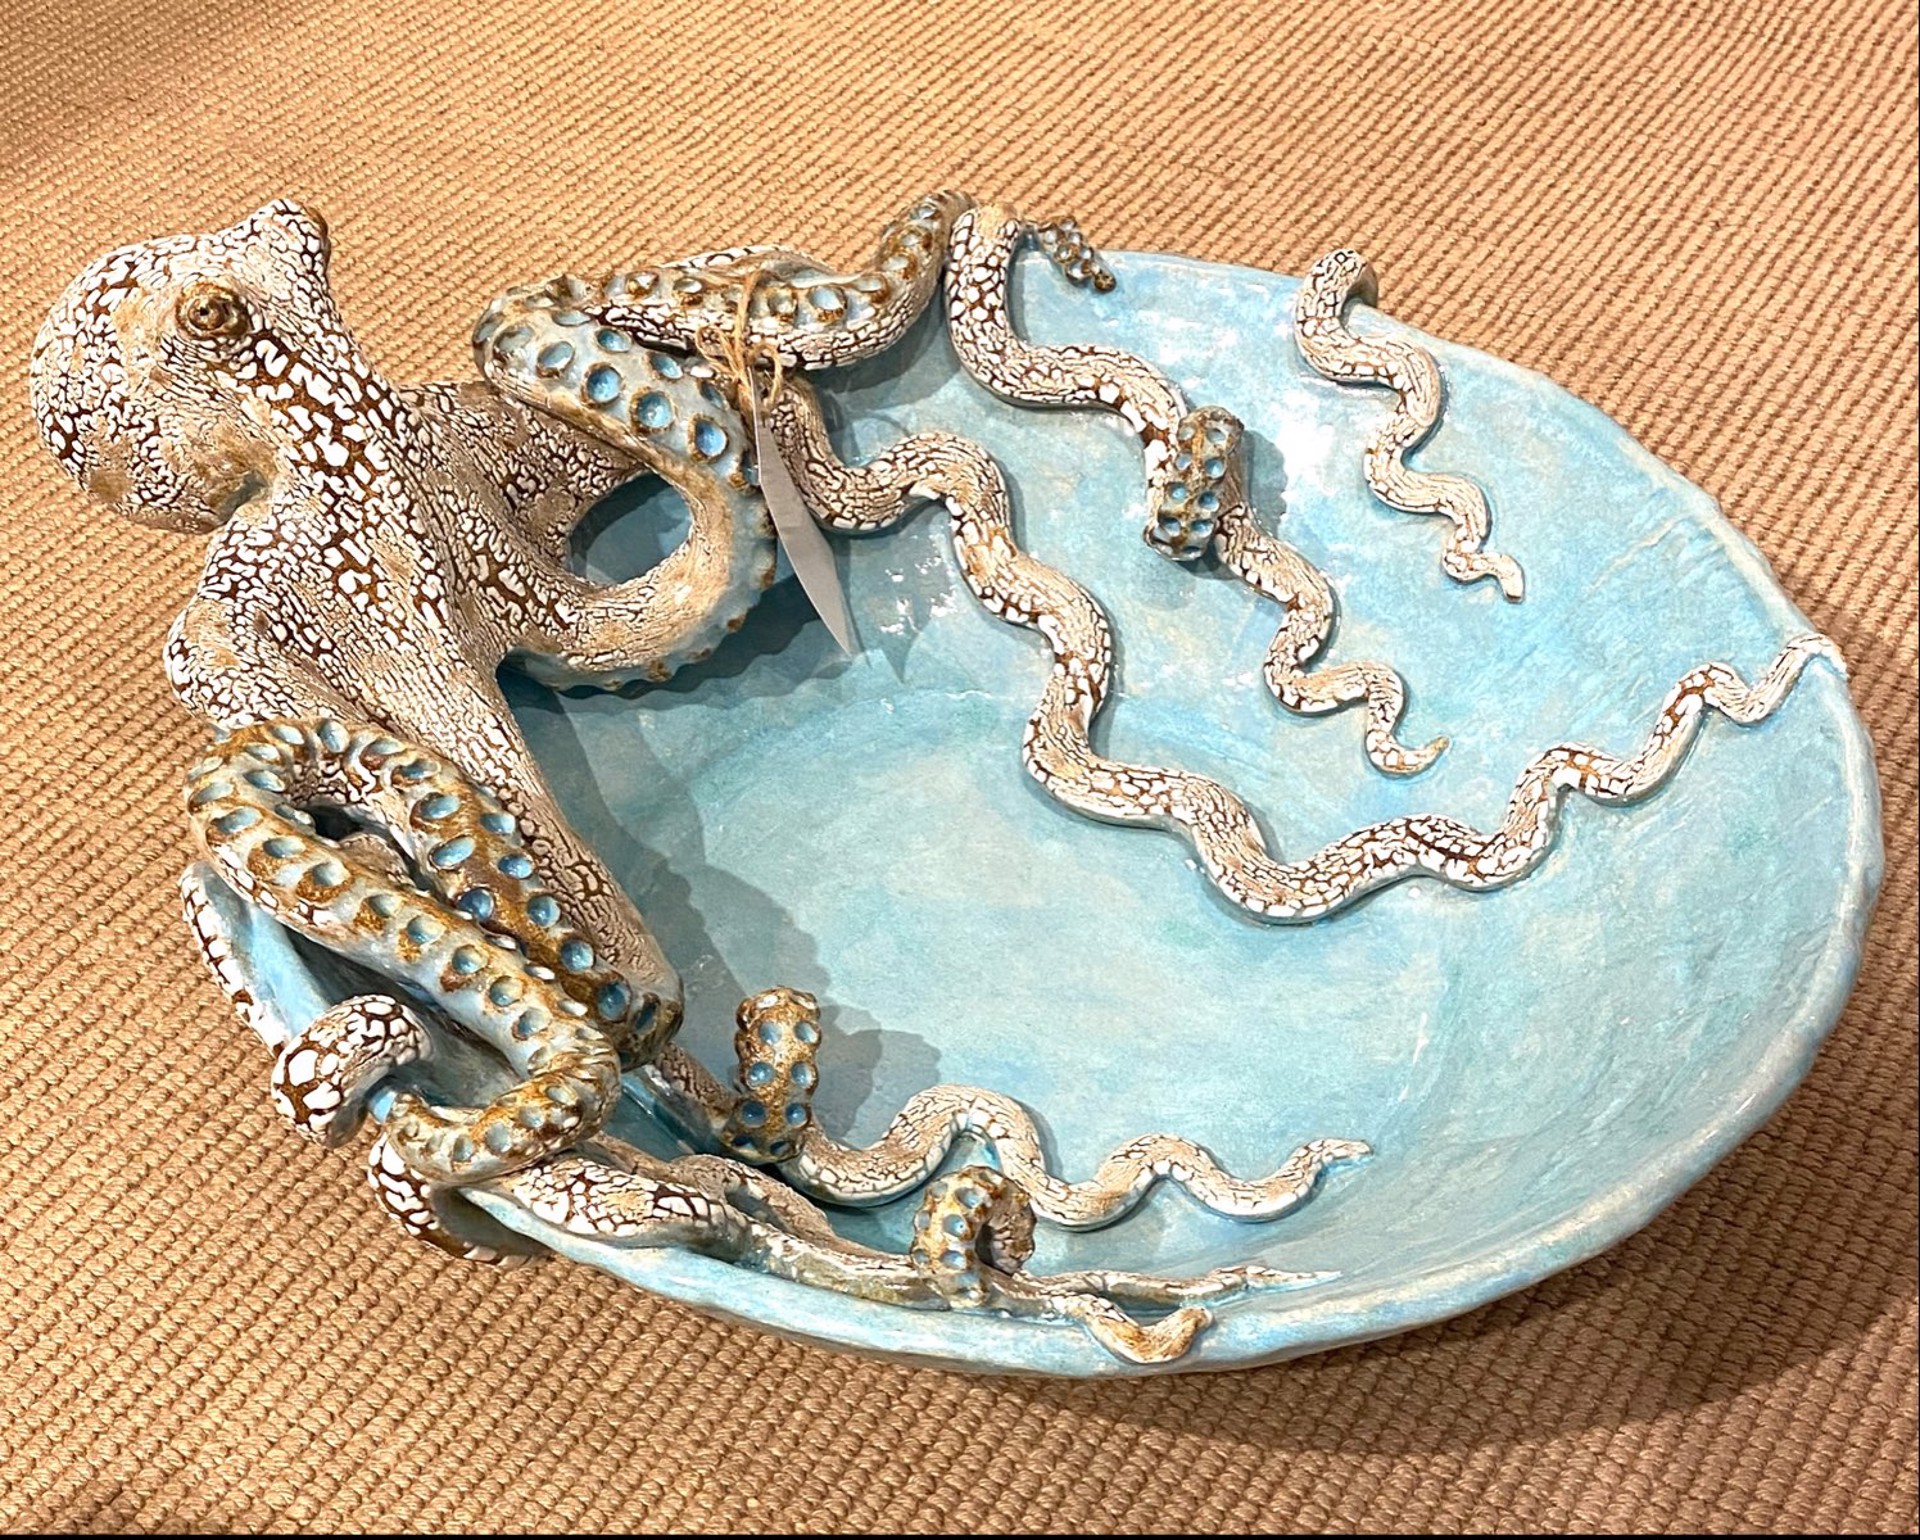 Giant Octopus Bowl~Caribbean Blue by Shayne Greco